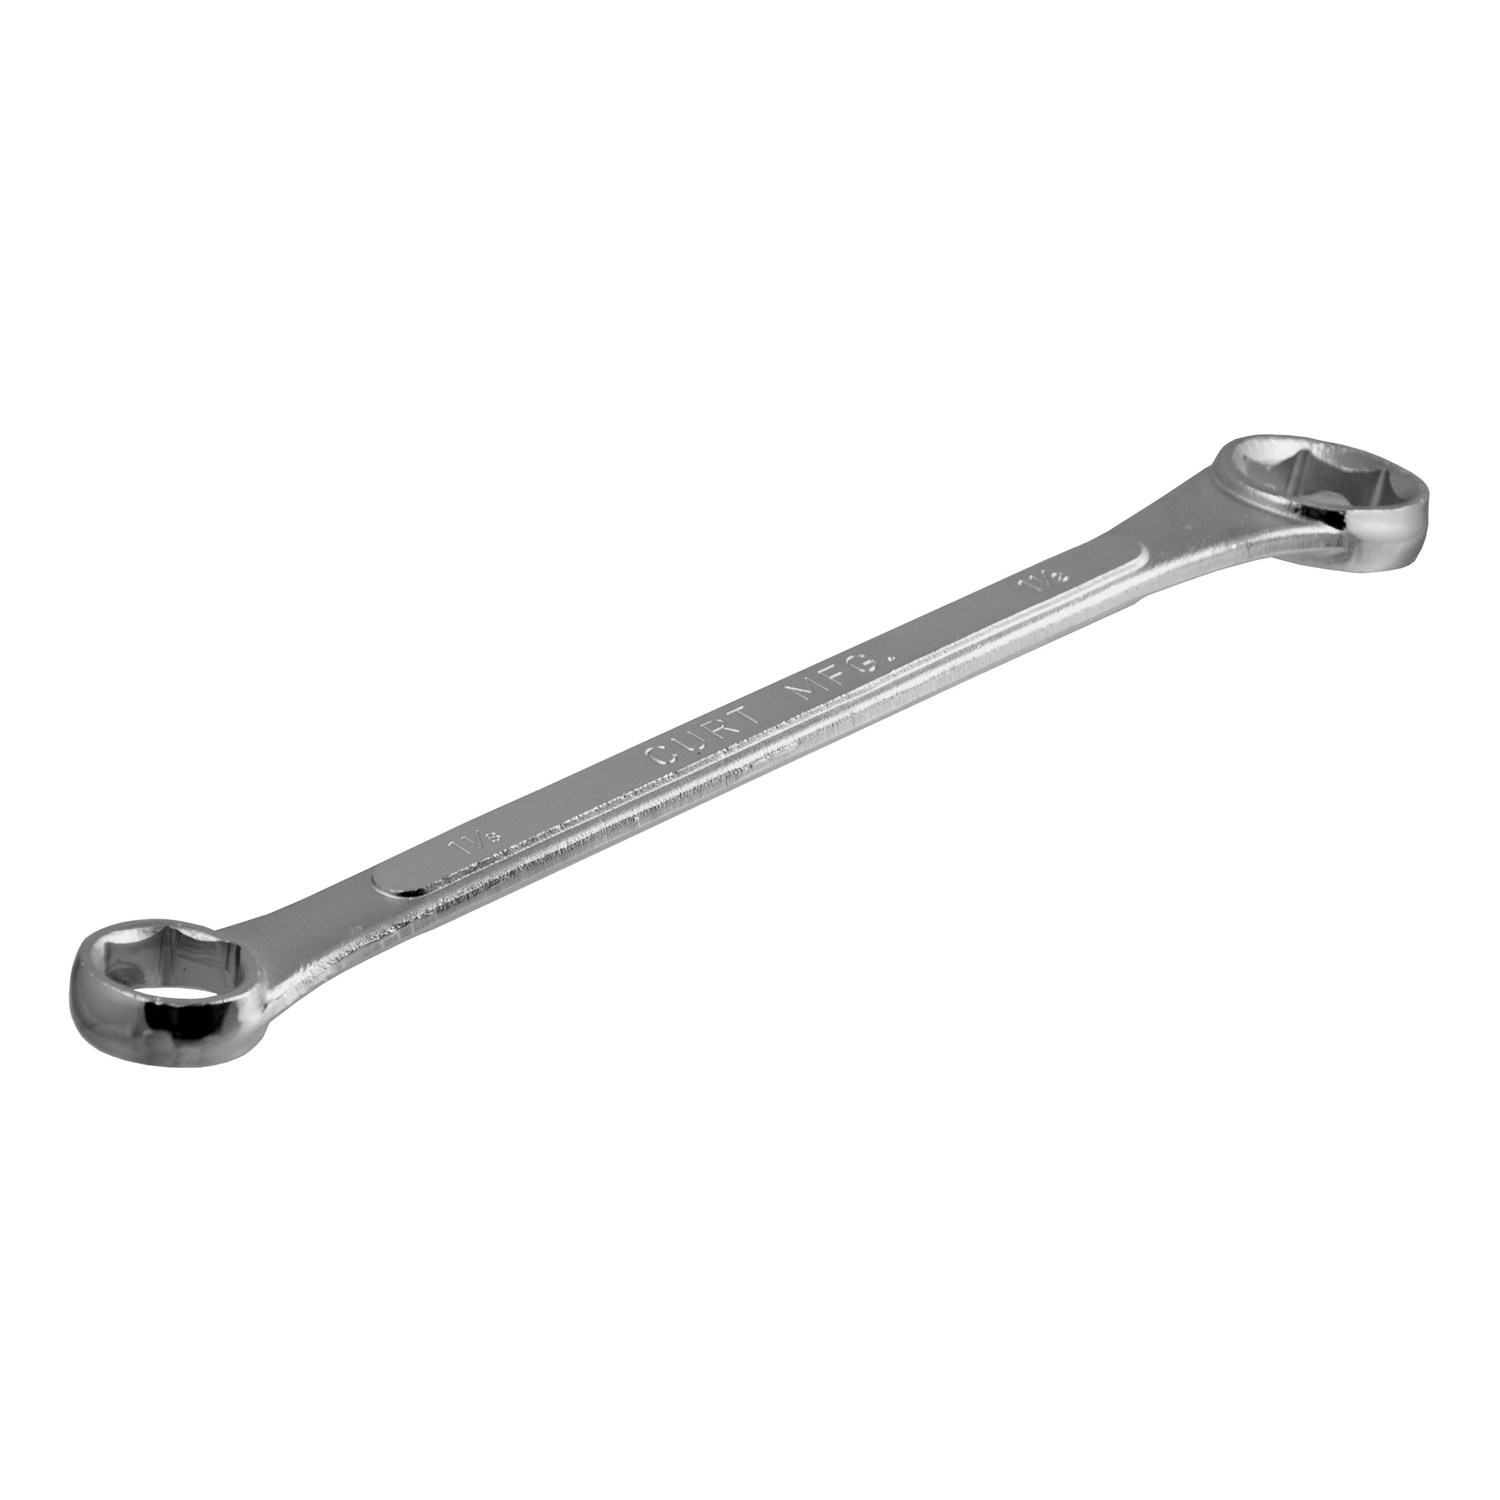 CURT Manufacturing CURT Manufacturing 20001 Hitch Ball Nut Wrench  Fits